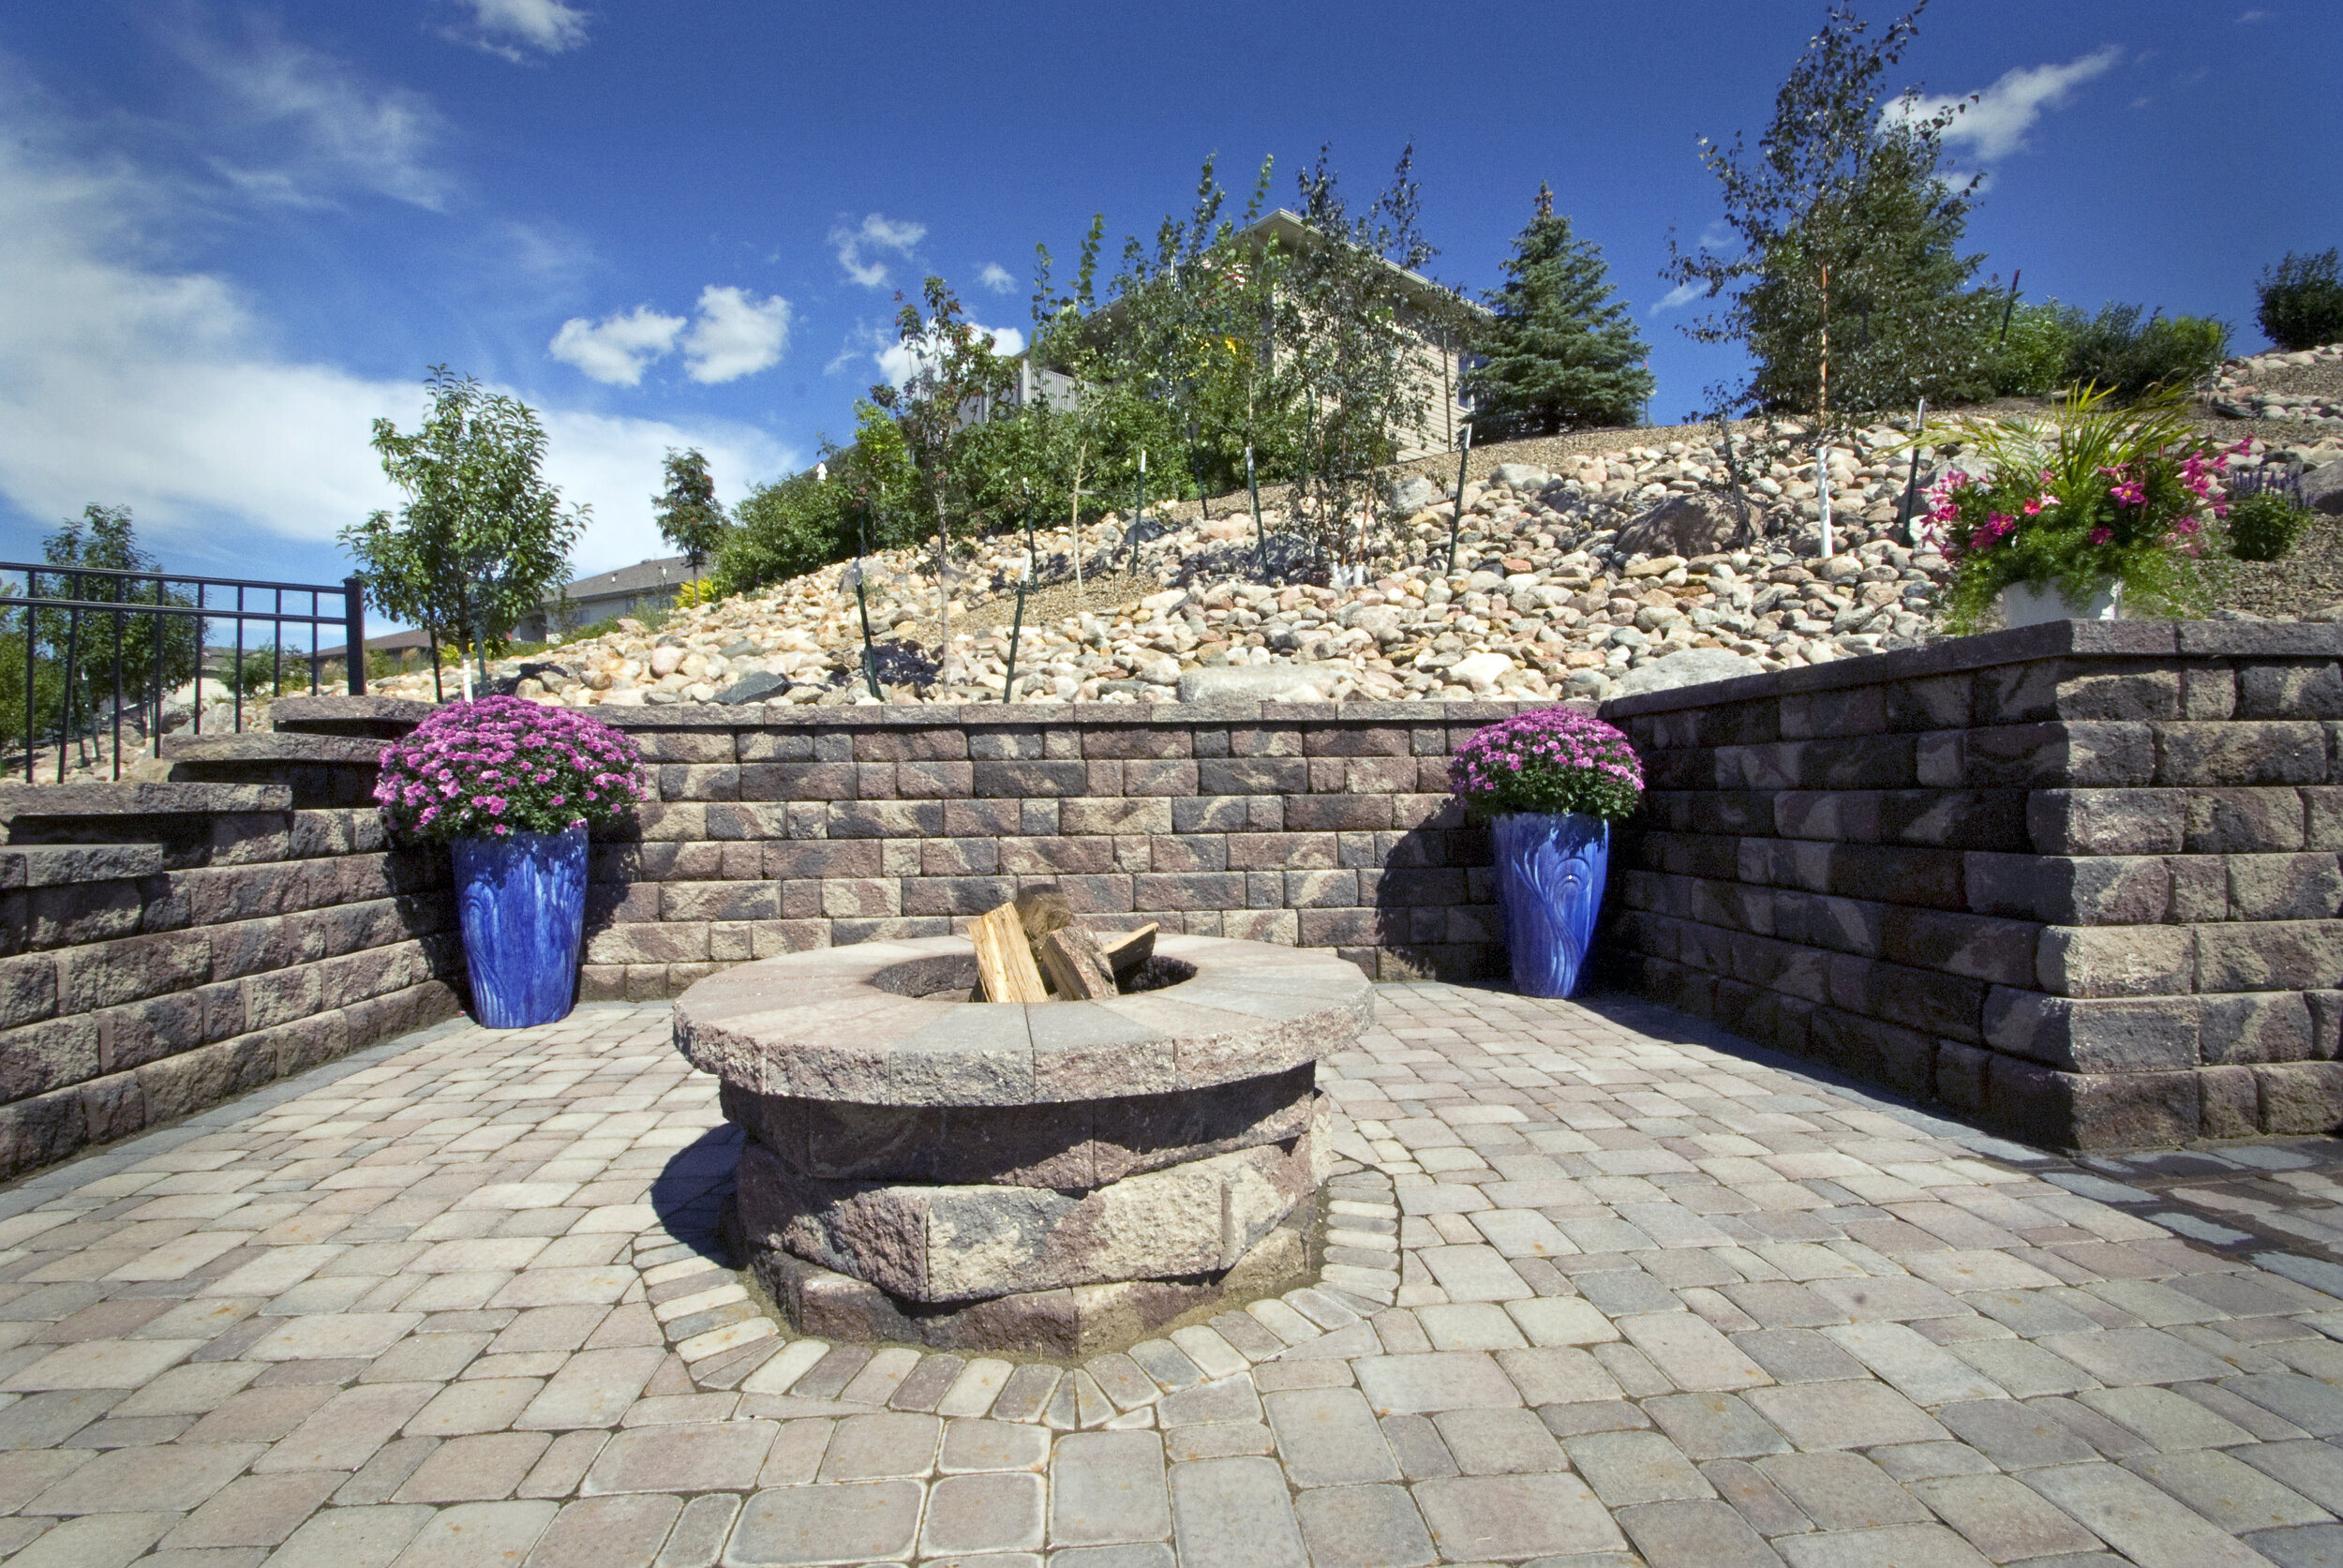 res fire pit patio block wall rock edg ALE_0341.jpg